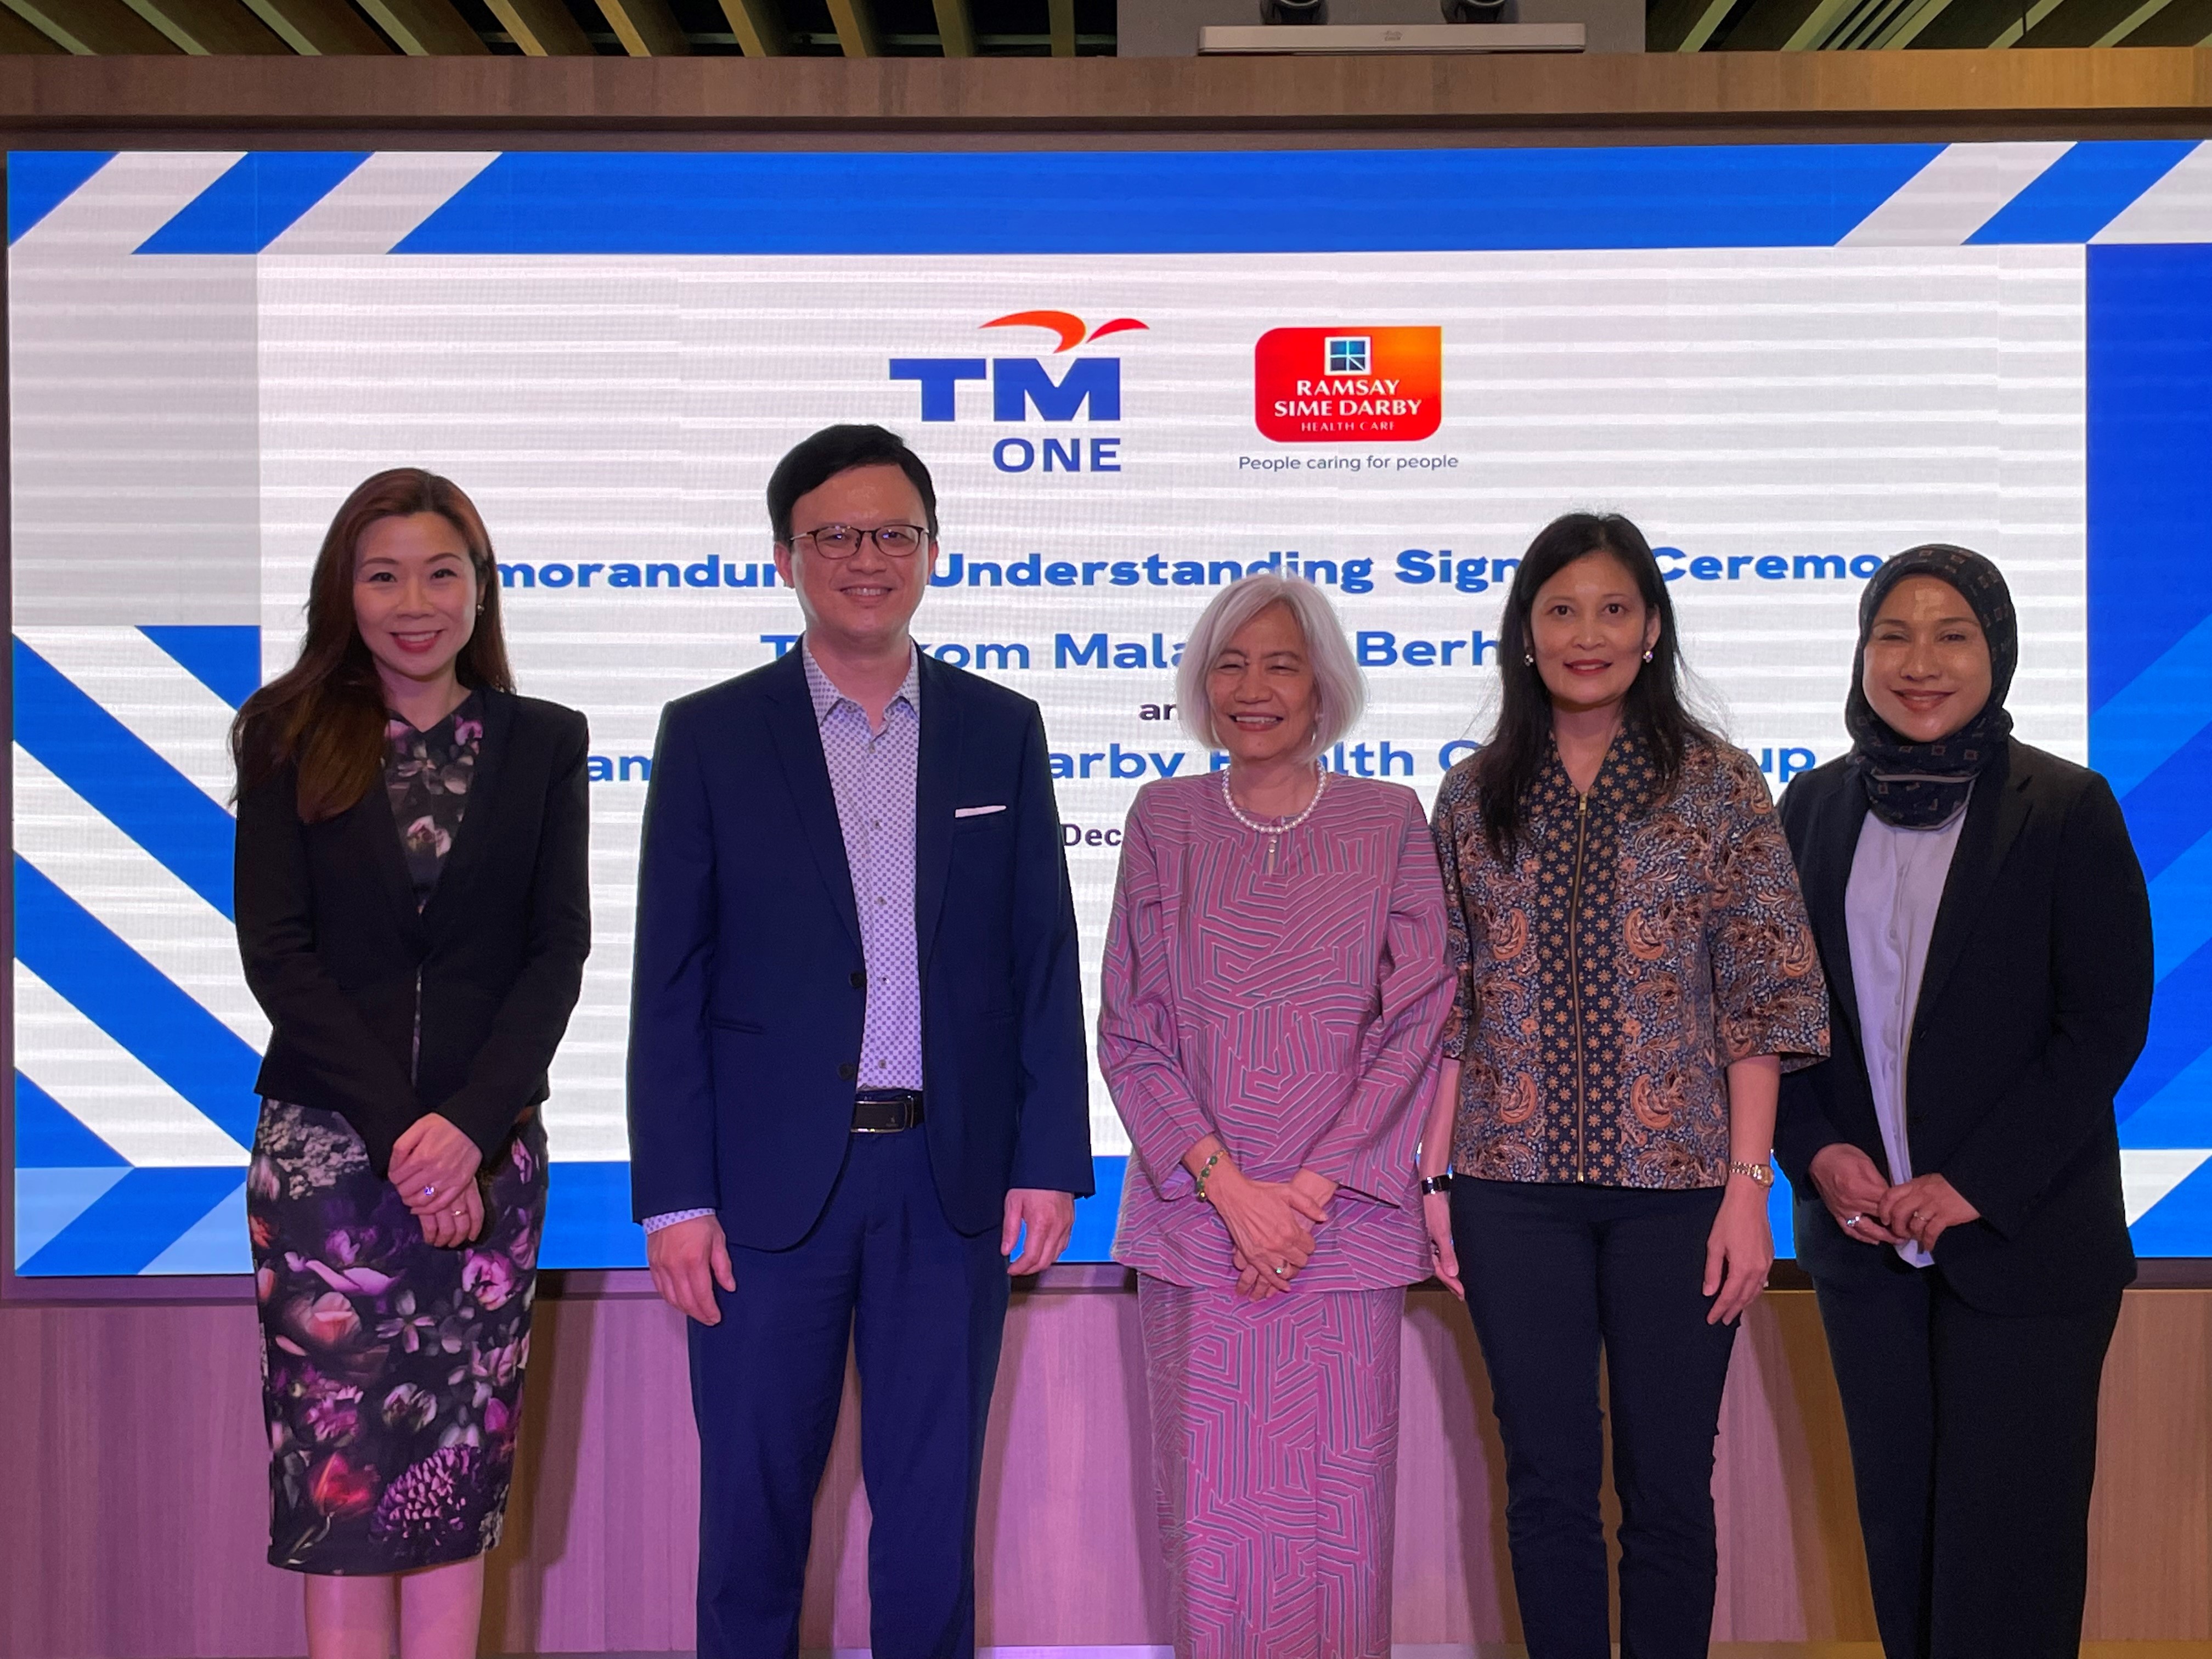 Left to right: Wong Ching Yee, chief operating officer-Corporate, RSDH; Peter Hong, group chief executive officer, RSDH; Yap Sim Bee, interim chief executive officer, ParkCity Medical Centre; Shazurawati Abd Karim, executive vice president, TM One; and Nora’zam Jaafar, head of Enterprise Sales, TM One.